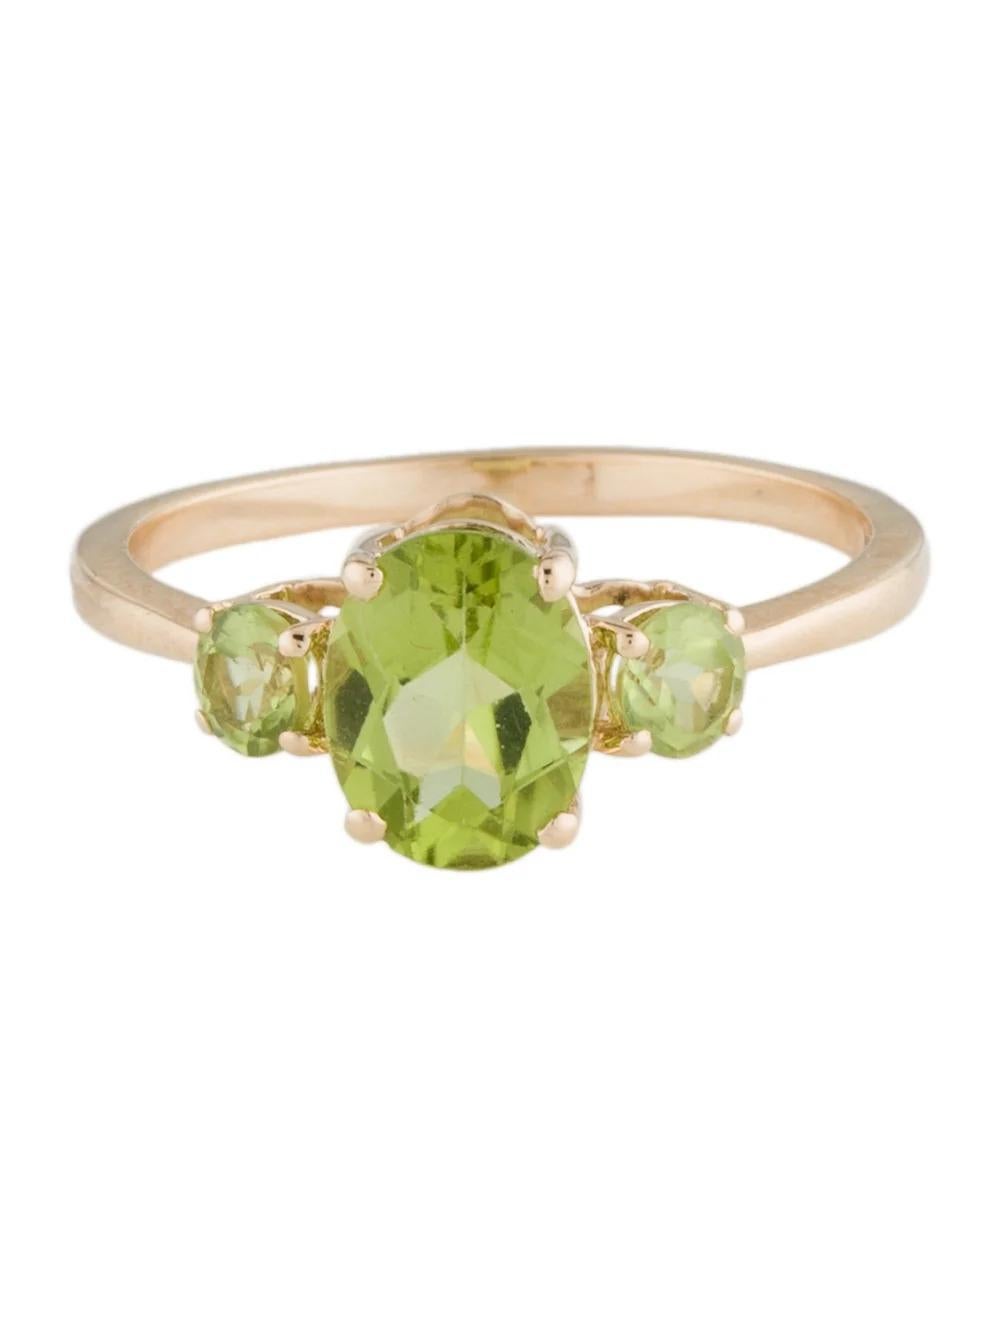 Oval Cut 14K Yellow Gold Peridot Cocktail Ring, Size 7: Vibrant Green Gemstone Jewelry For Sale